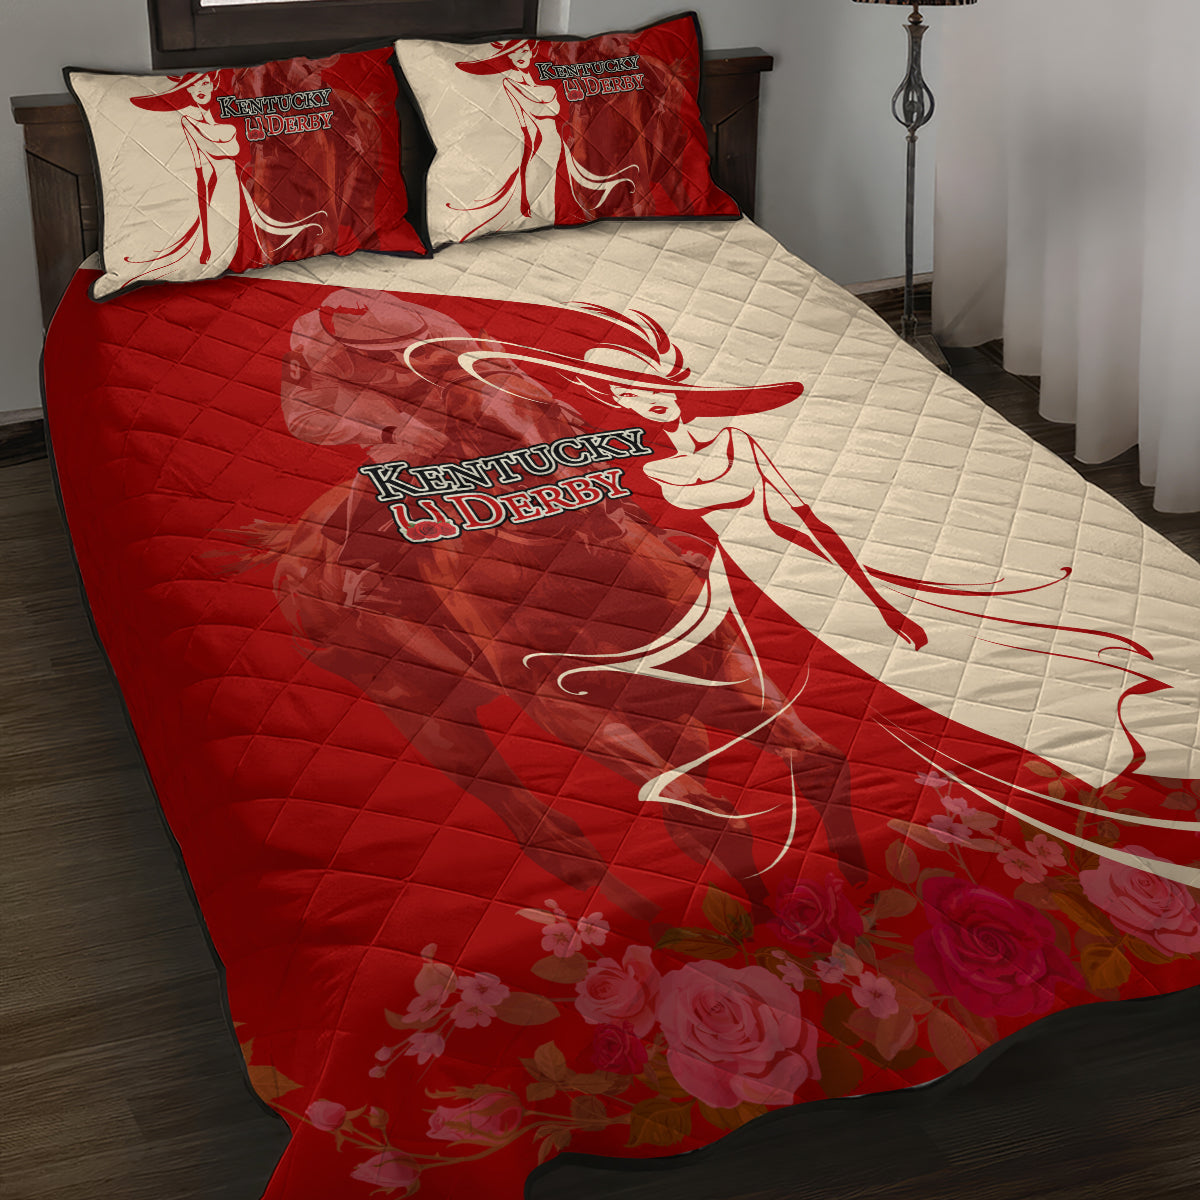 Kentucky Racing Horses Derby Hat Girl Quilt Bed Set Red Color